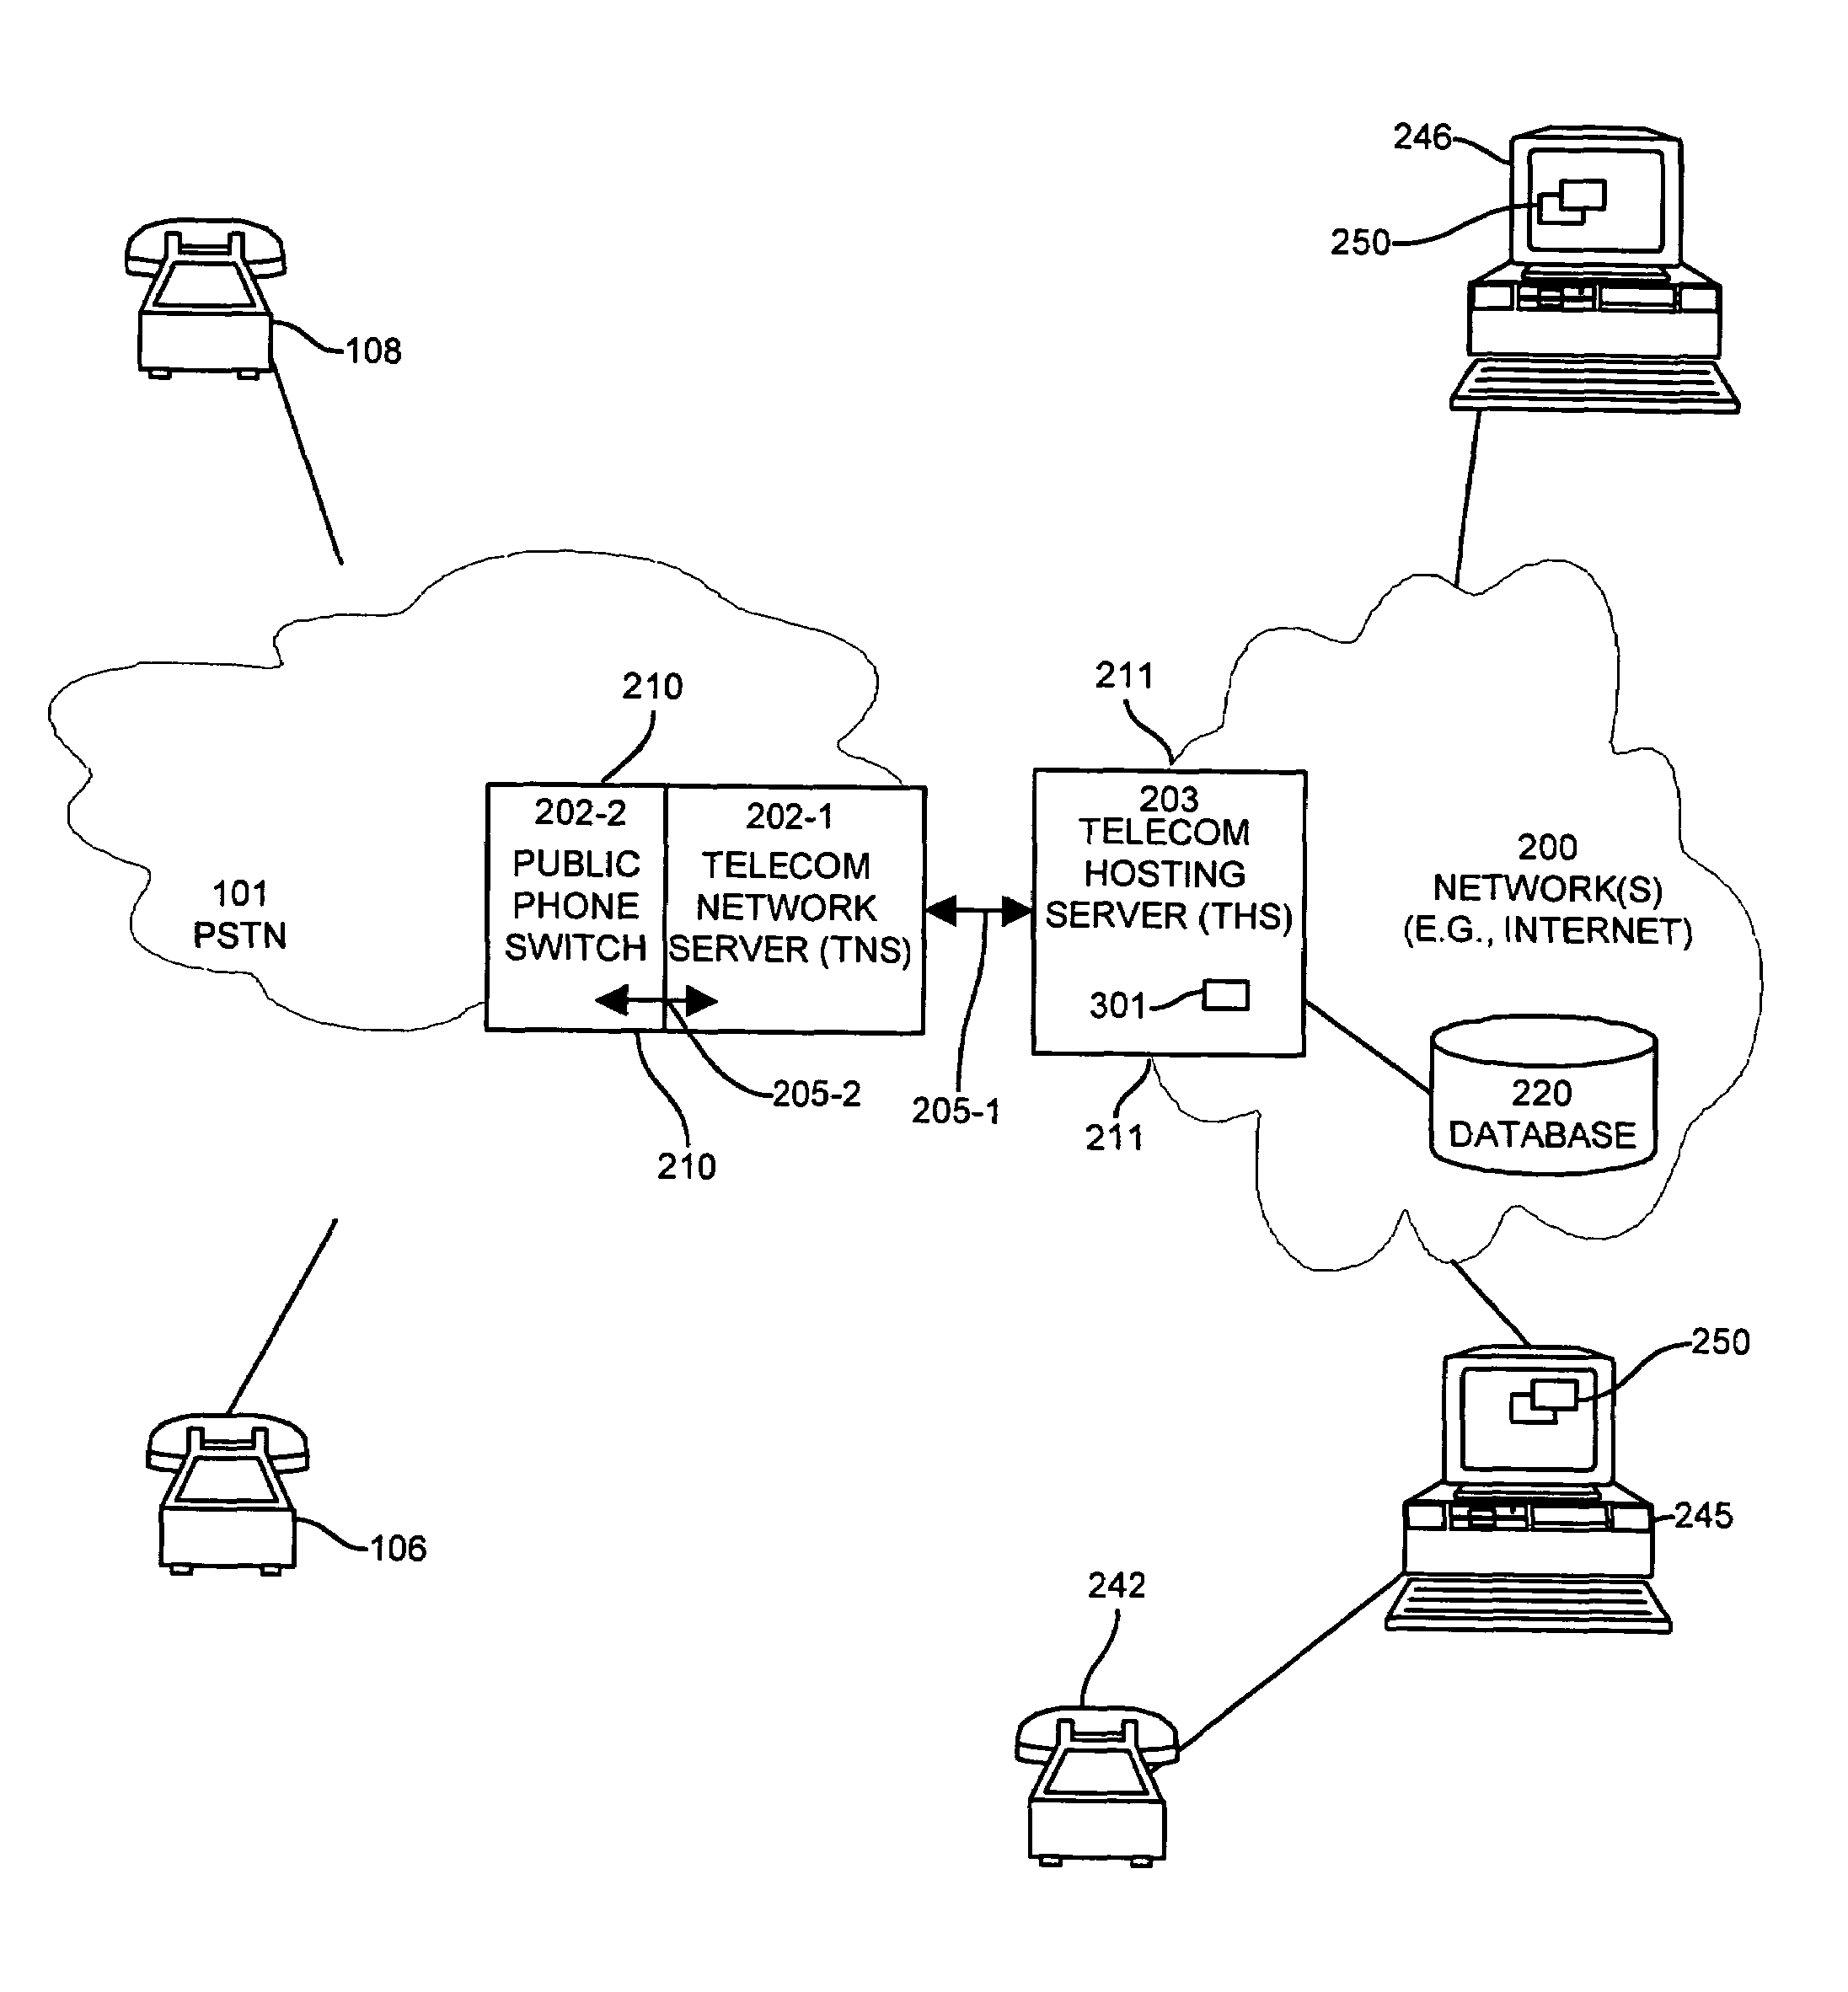 Methods and apparatus for providing communications services between connectionless and connection-oriented networks